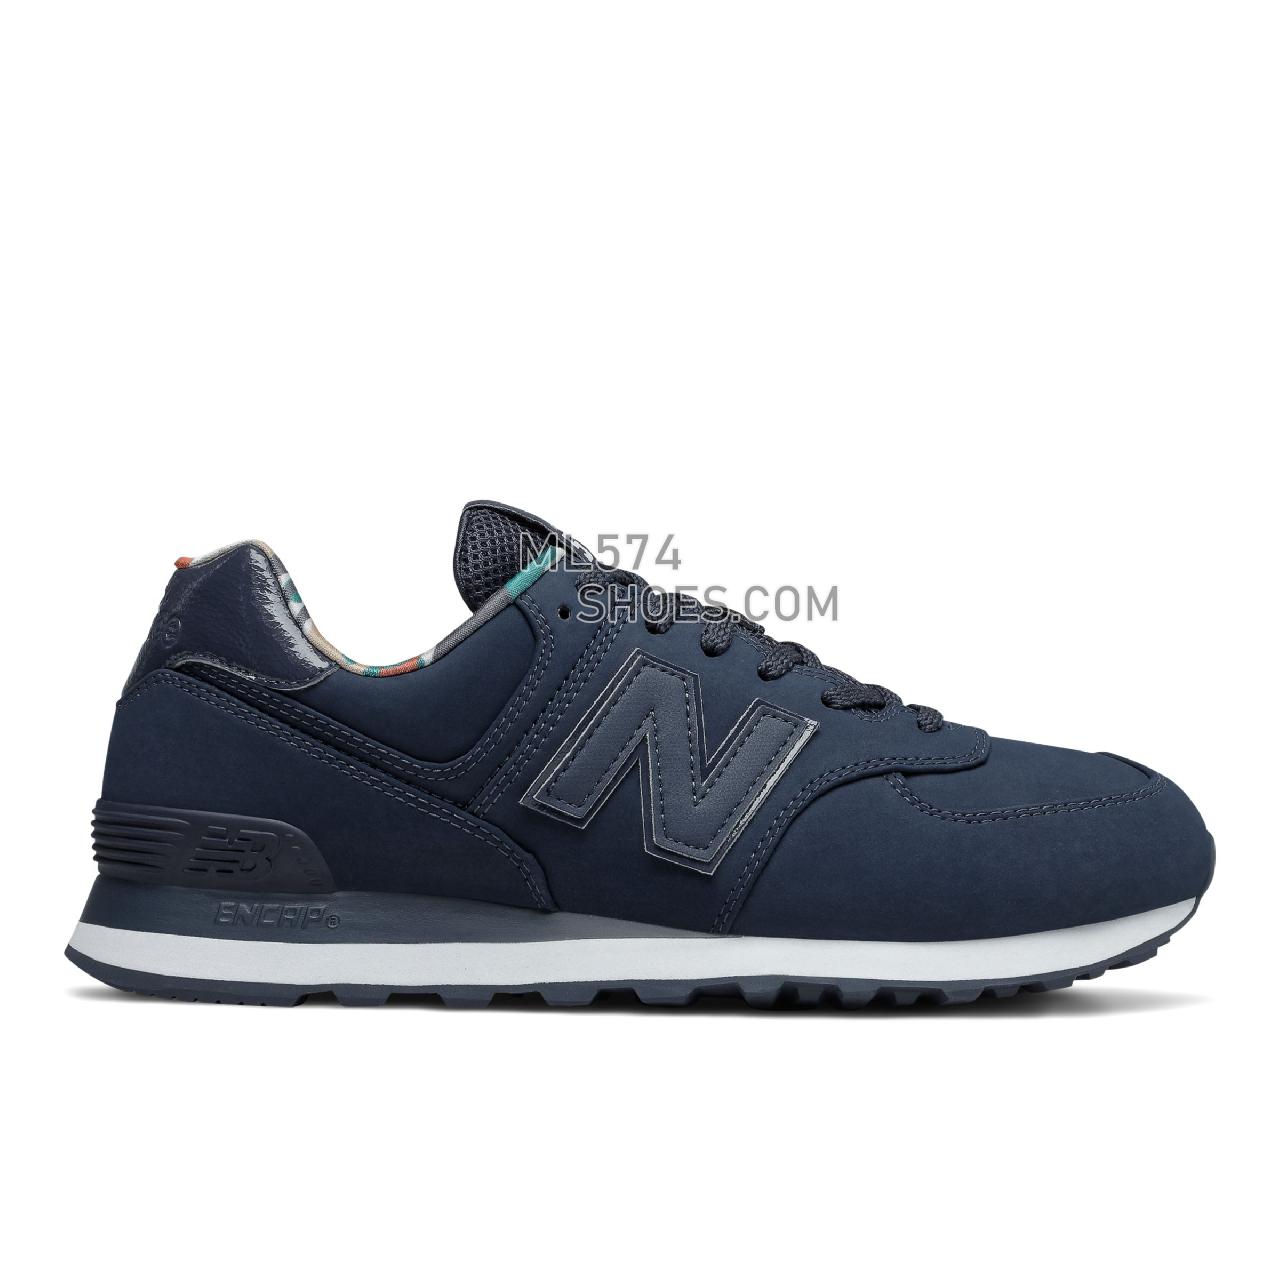 New Balance 574v2 - Men's Classic Sneakers - Nb Navy with White - ML574GYZ